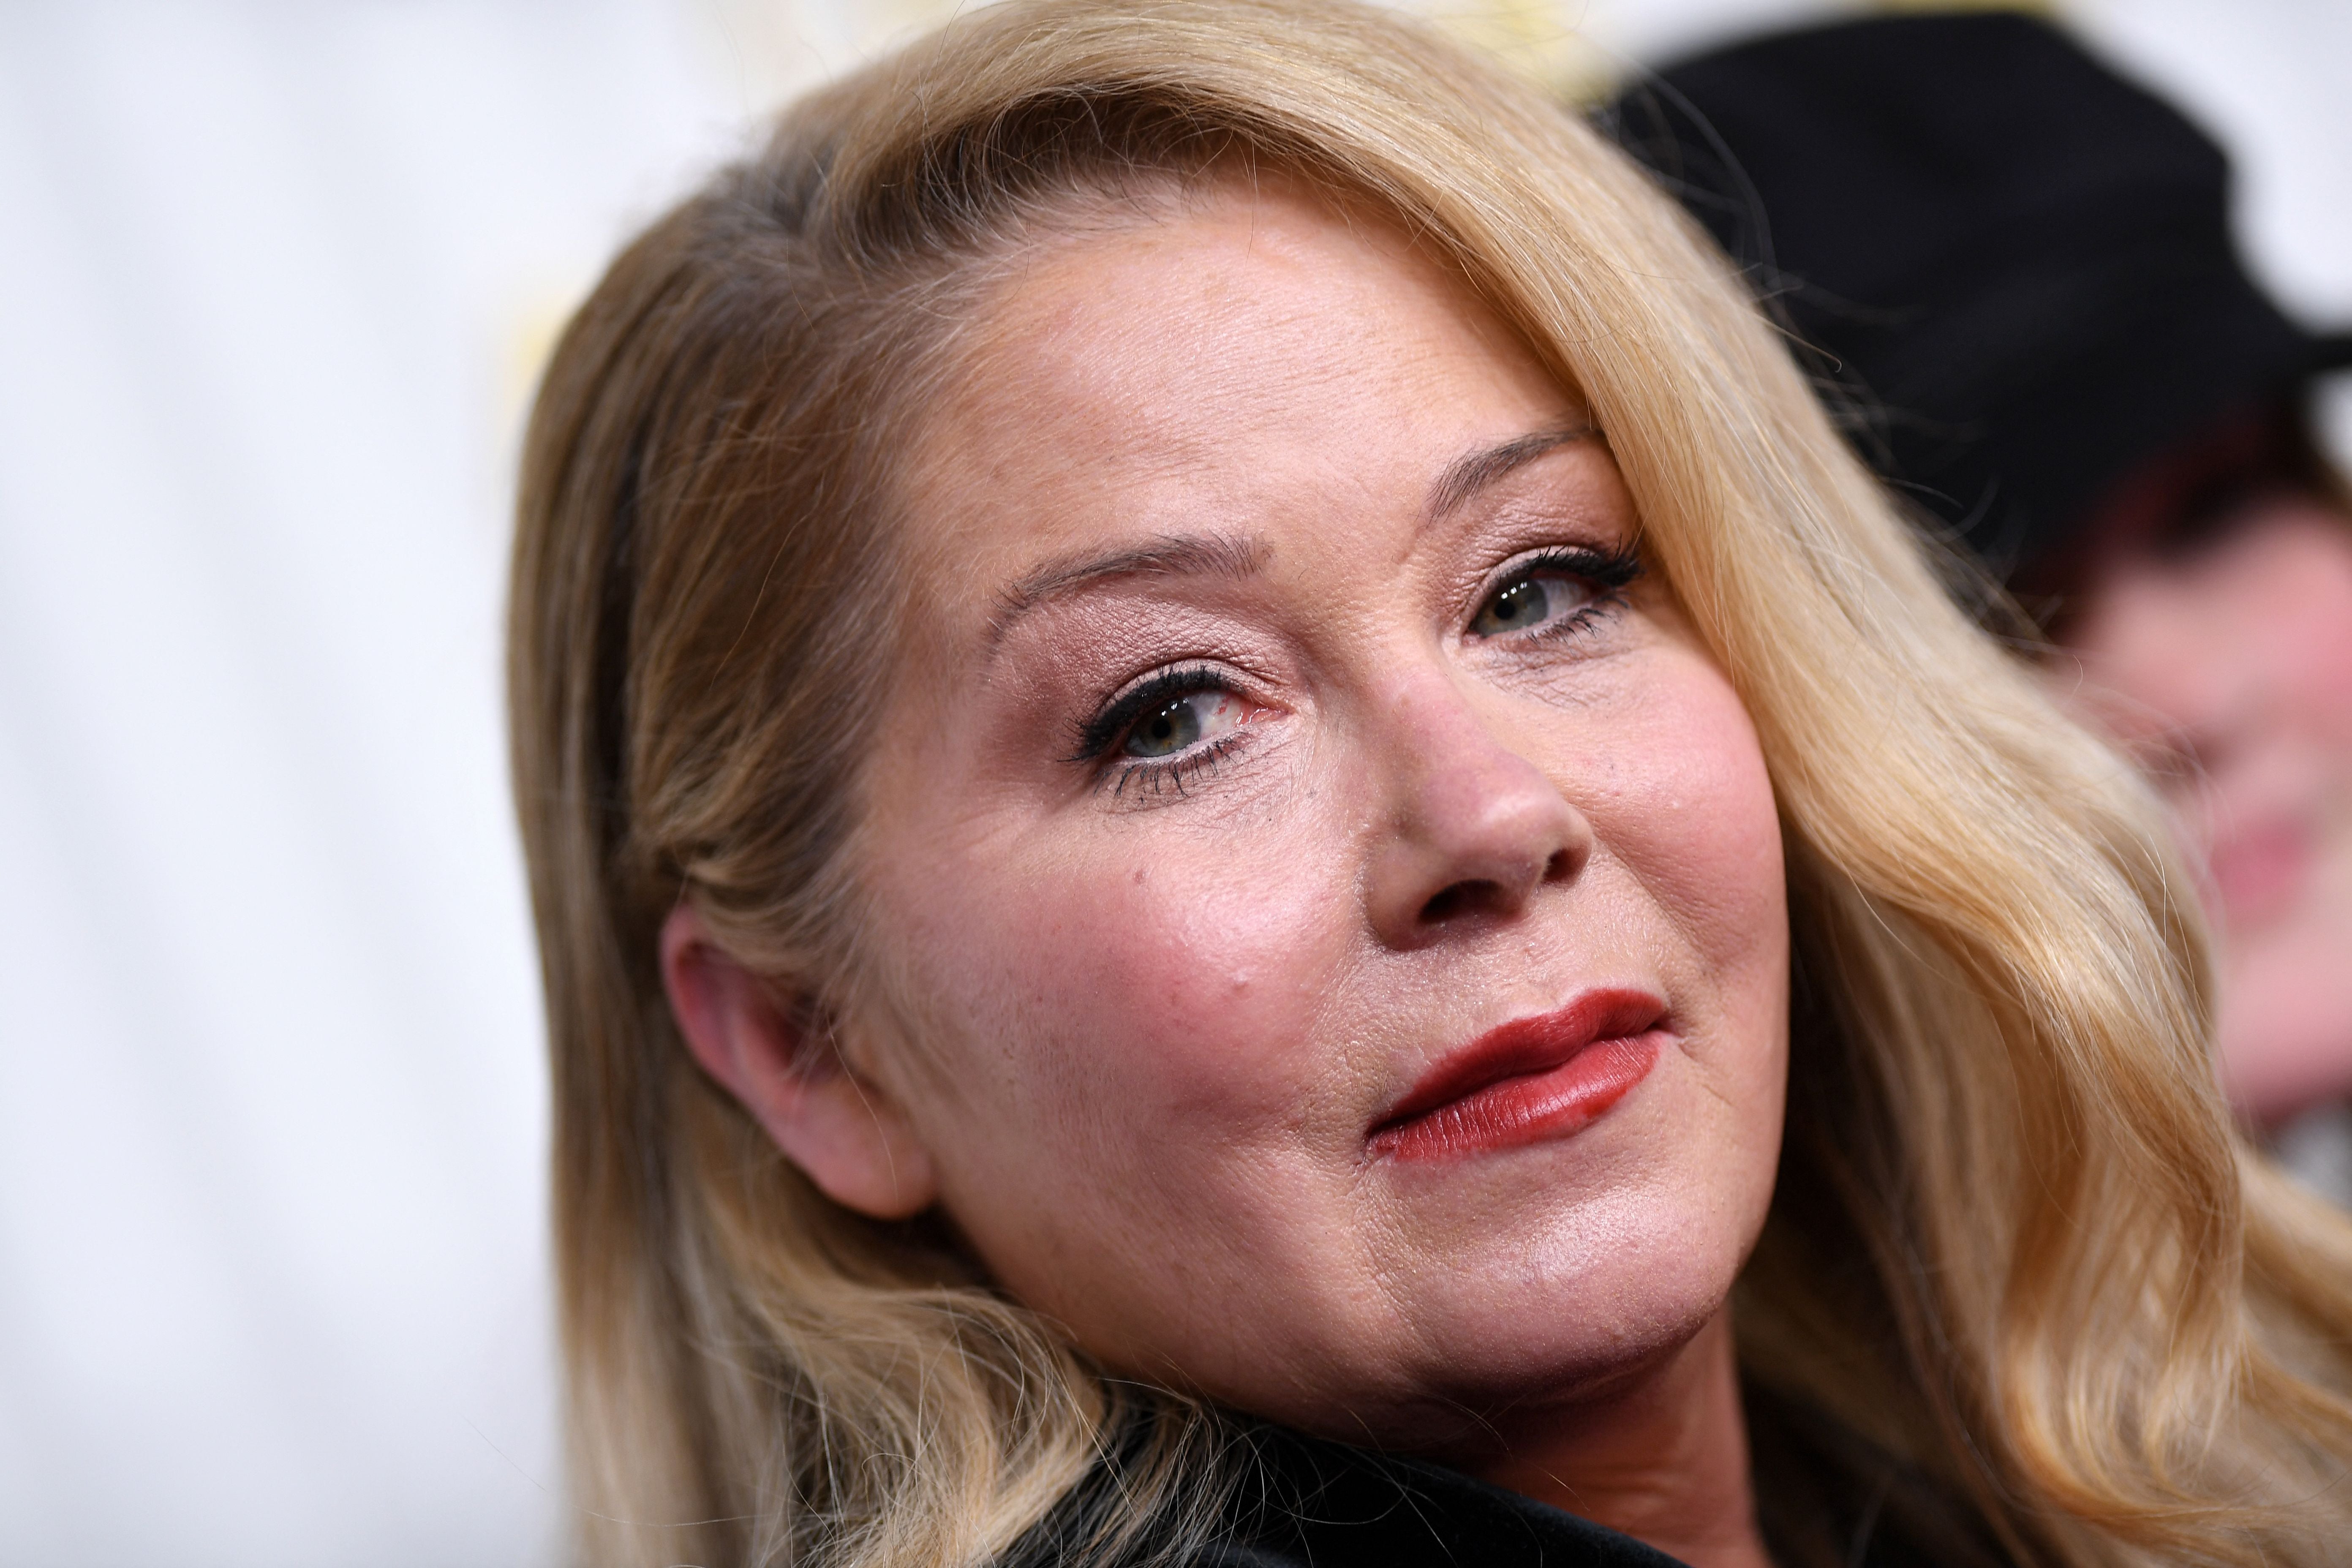 Christina Applegate has addressed concerns for her wellbeing after claims she ‘no longer enjoys being alive’